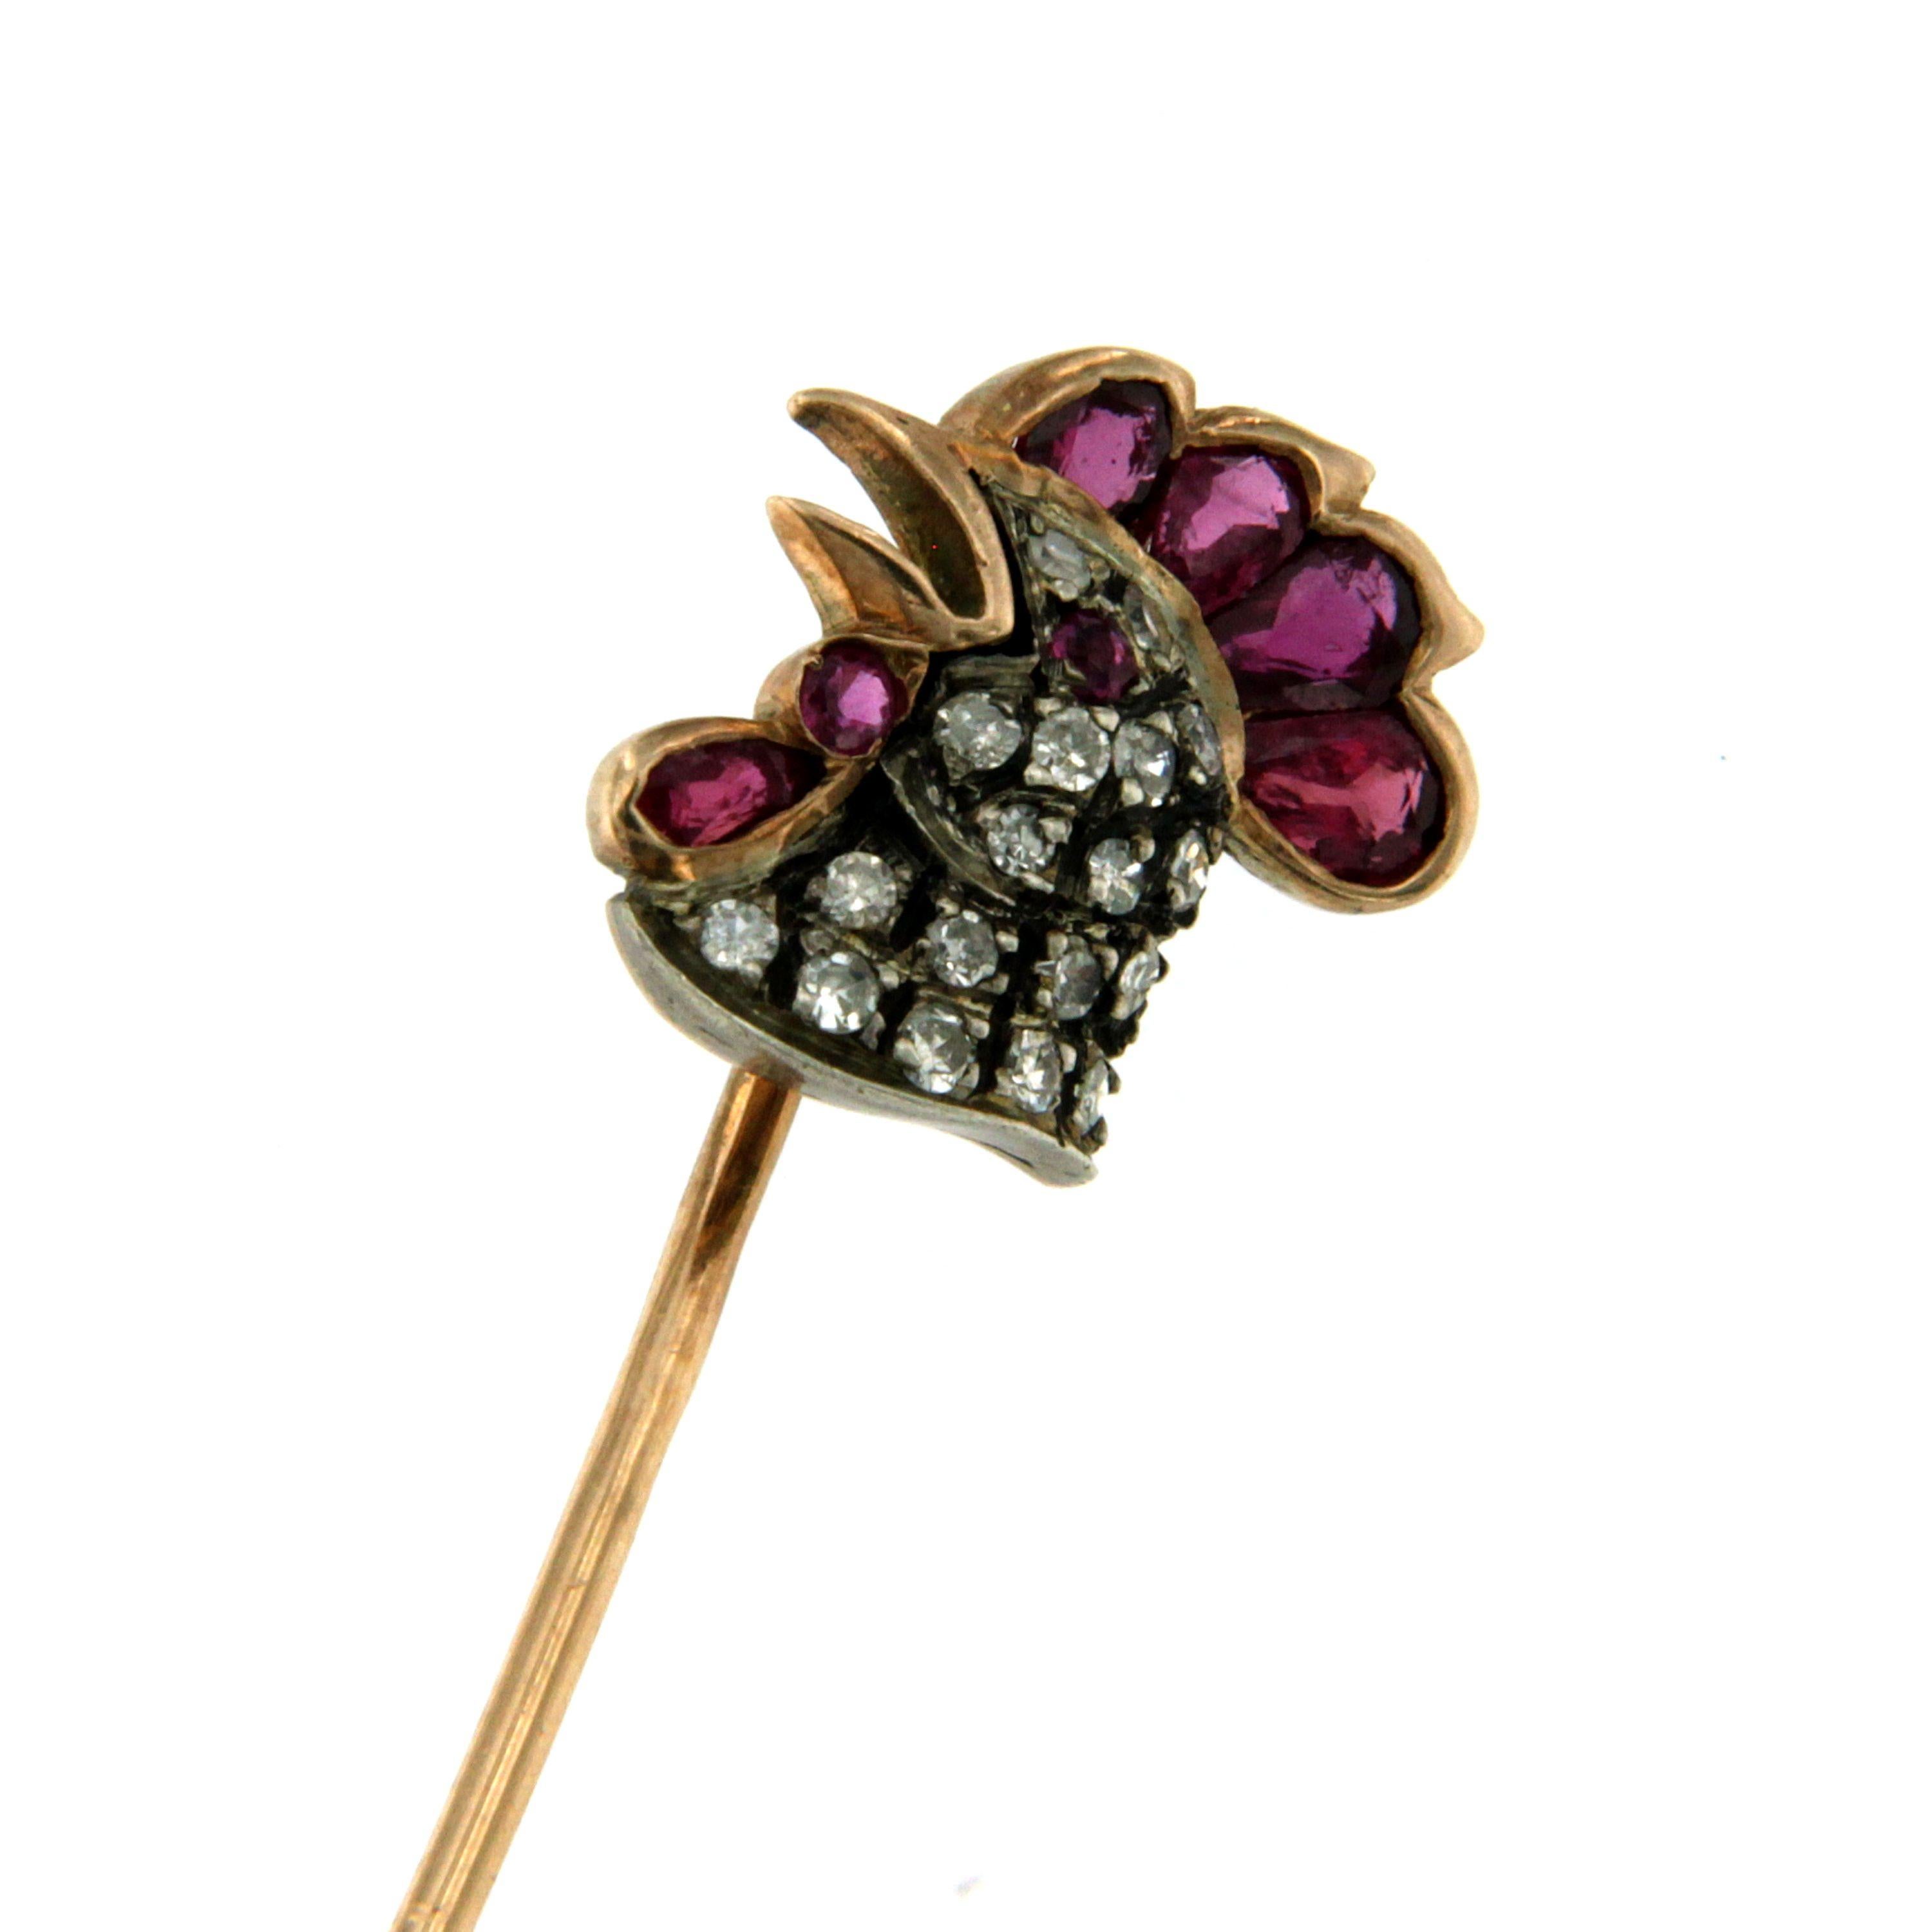 A Victorian 18k Gold Pin decorated with a cock, set with 0.80ct rubies and 0.25 ct Diamonds. Circa 1890

CONDITION: Pre-owned - Excellent 
METAL: 18k Gold
GEM STONE: Ruby 0.80 ct, Diamond 0.25 ct
DESIGN ERA: Victorian
MEASURES: long 2,44 in (6.2